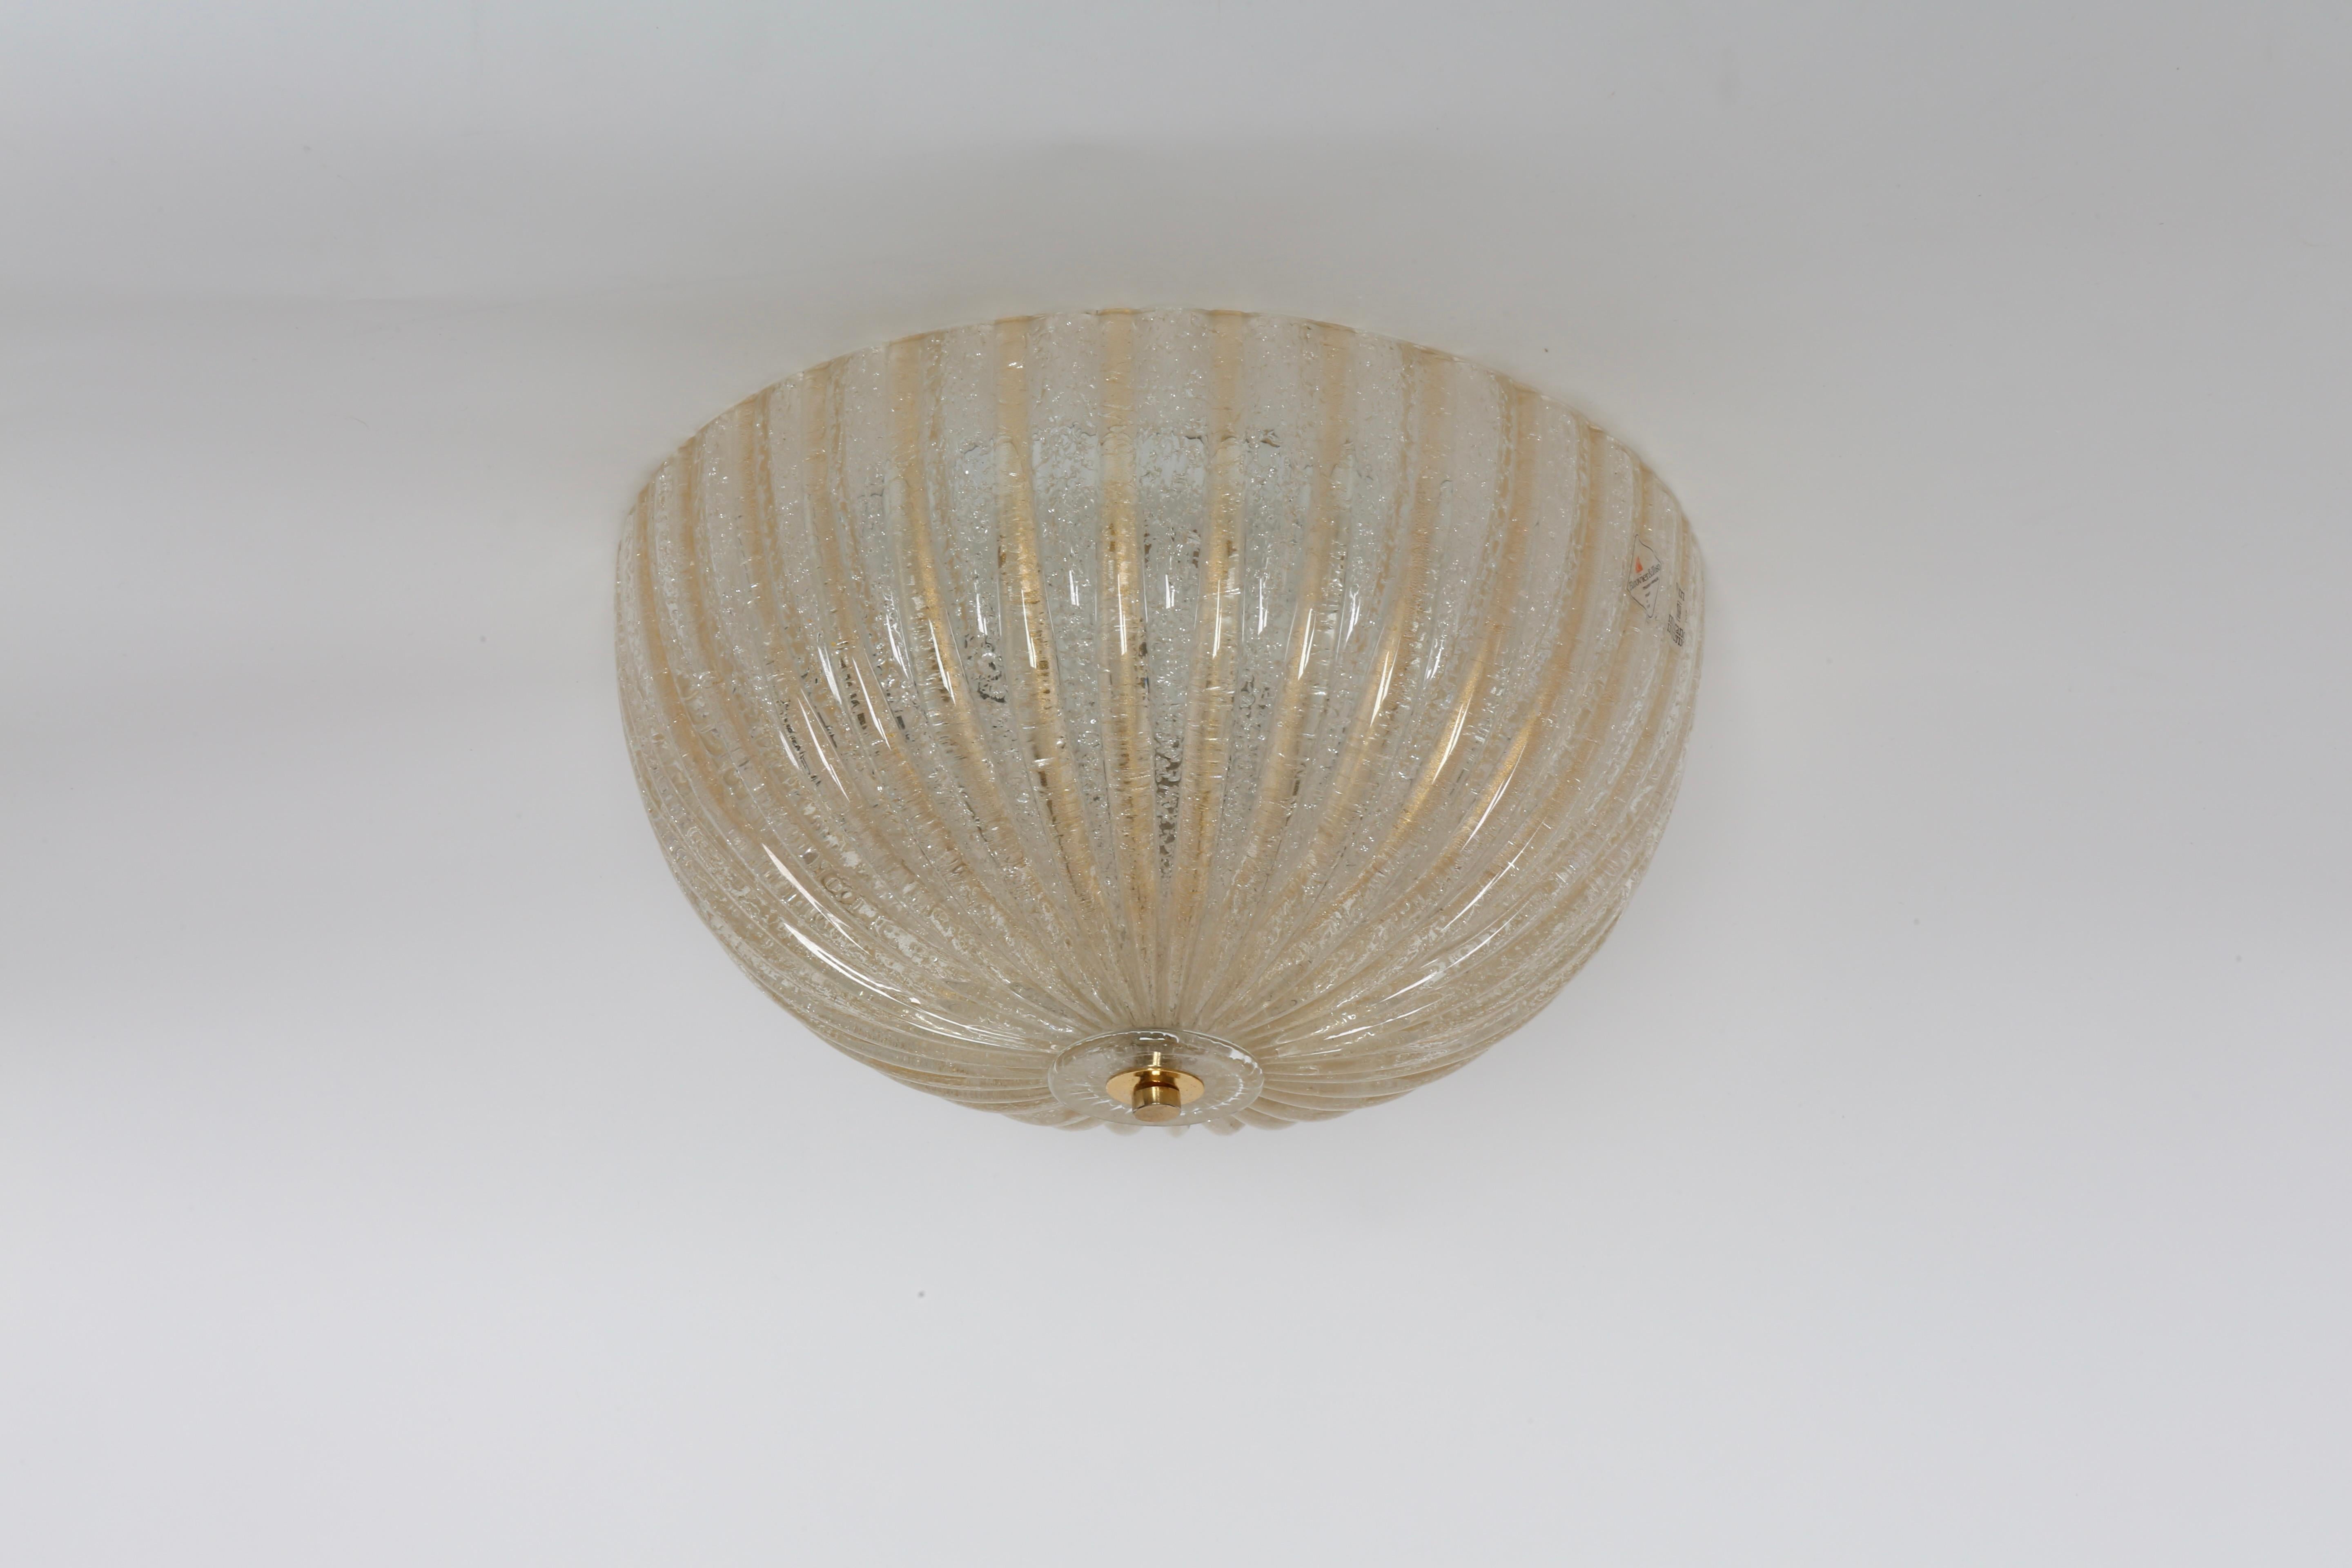 Metal Murano Flush Mount Ceiling Light by Barovier & Toso